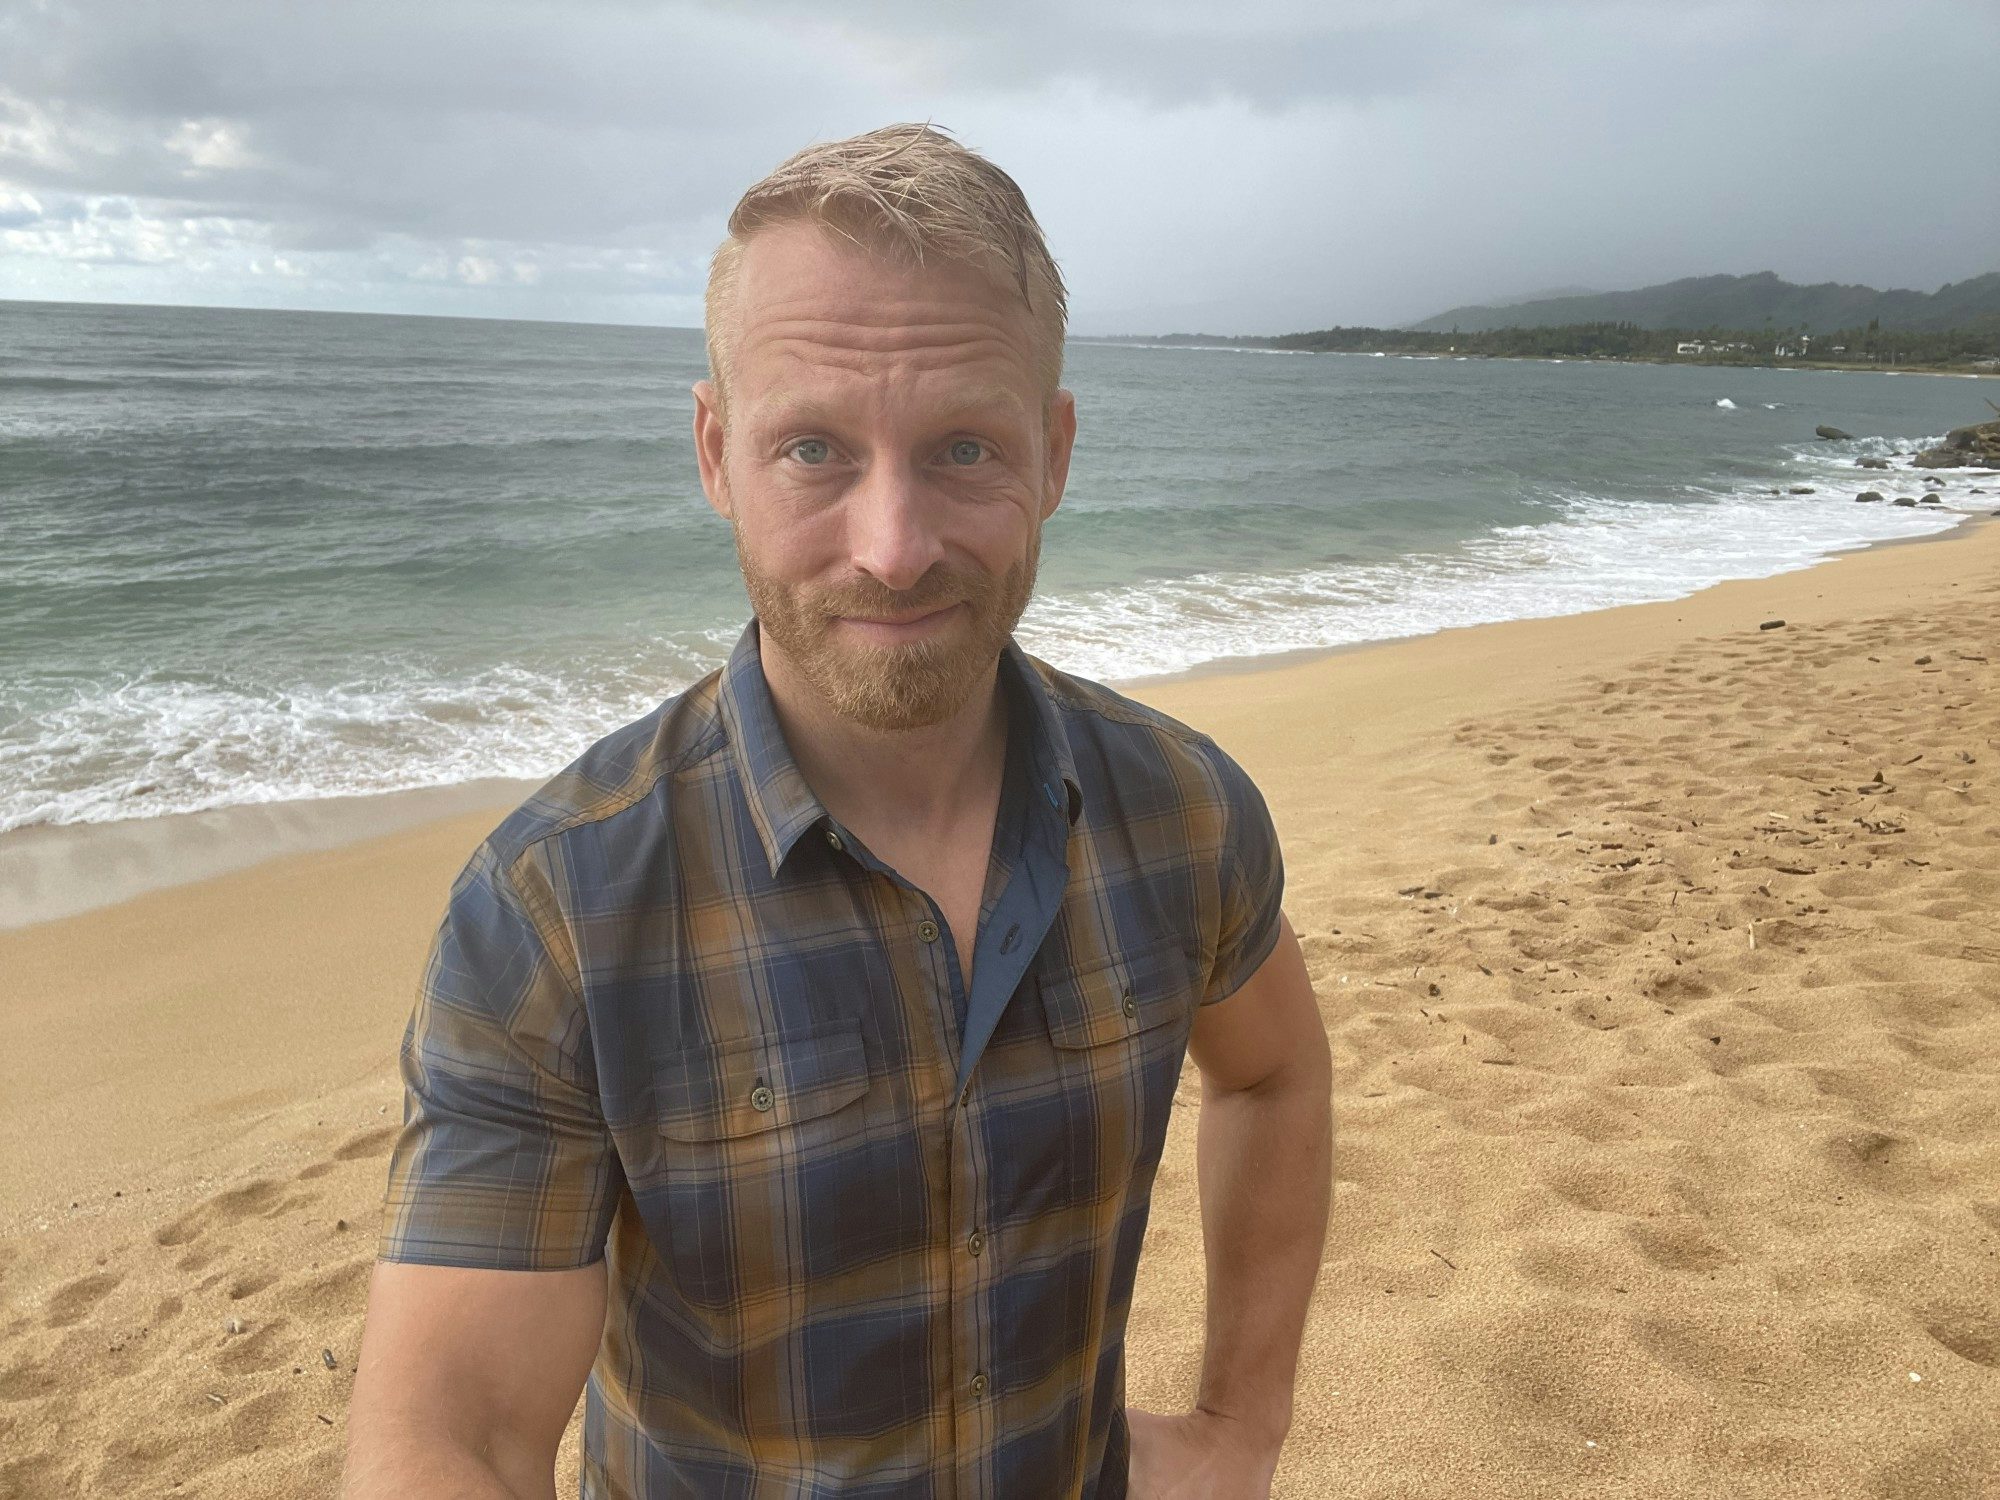 Travel Advisor Andrew Bergeron stands on a beach wearing a blue and brown plaid shirt